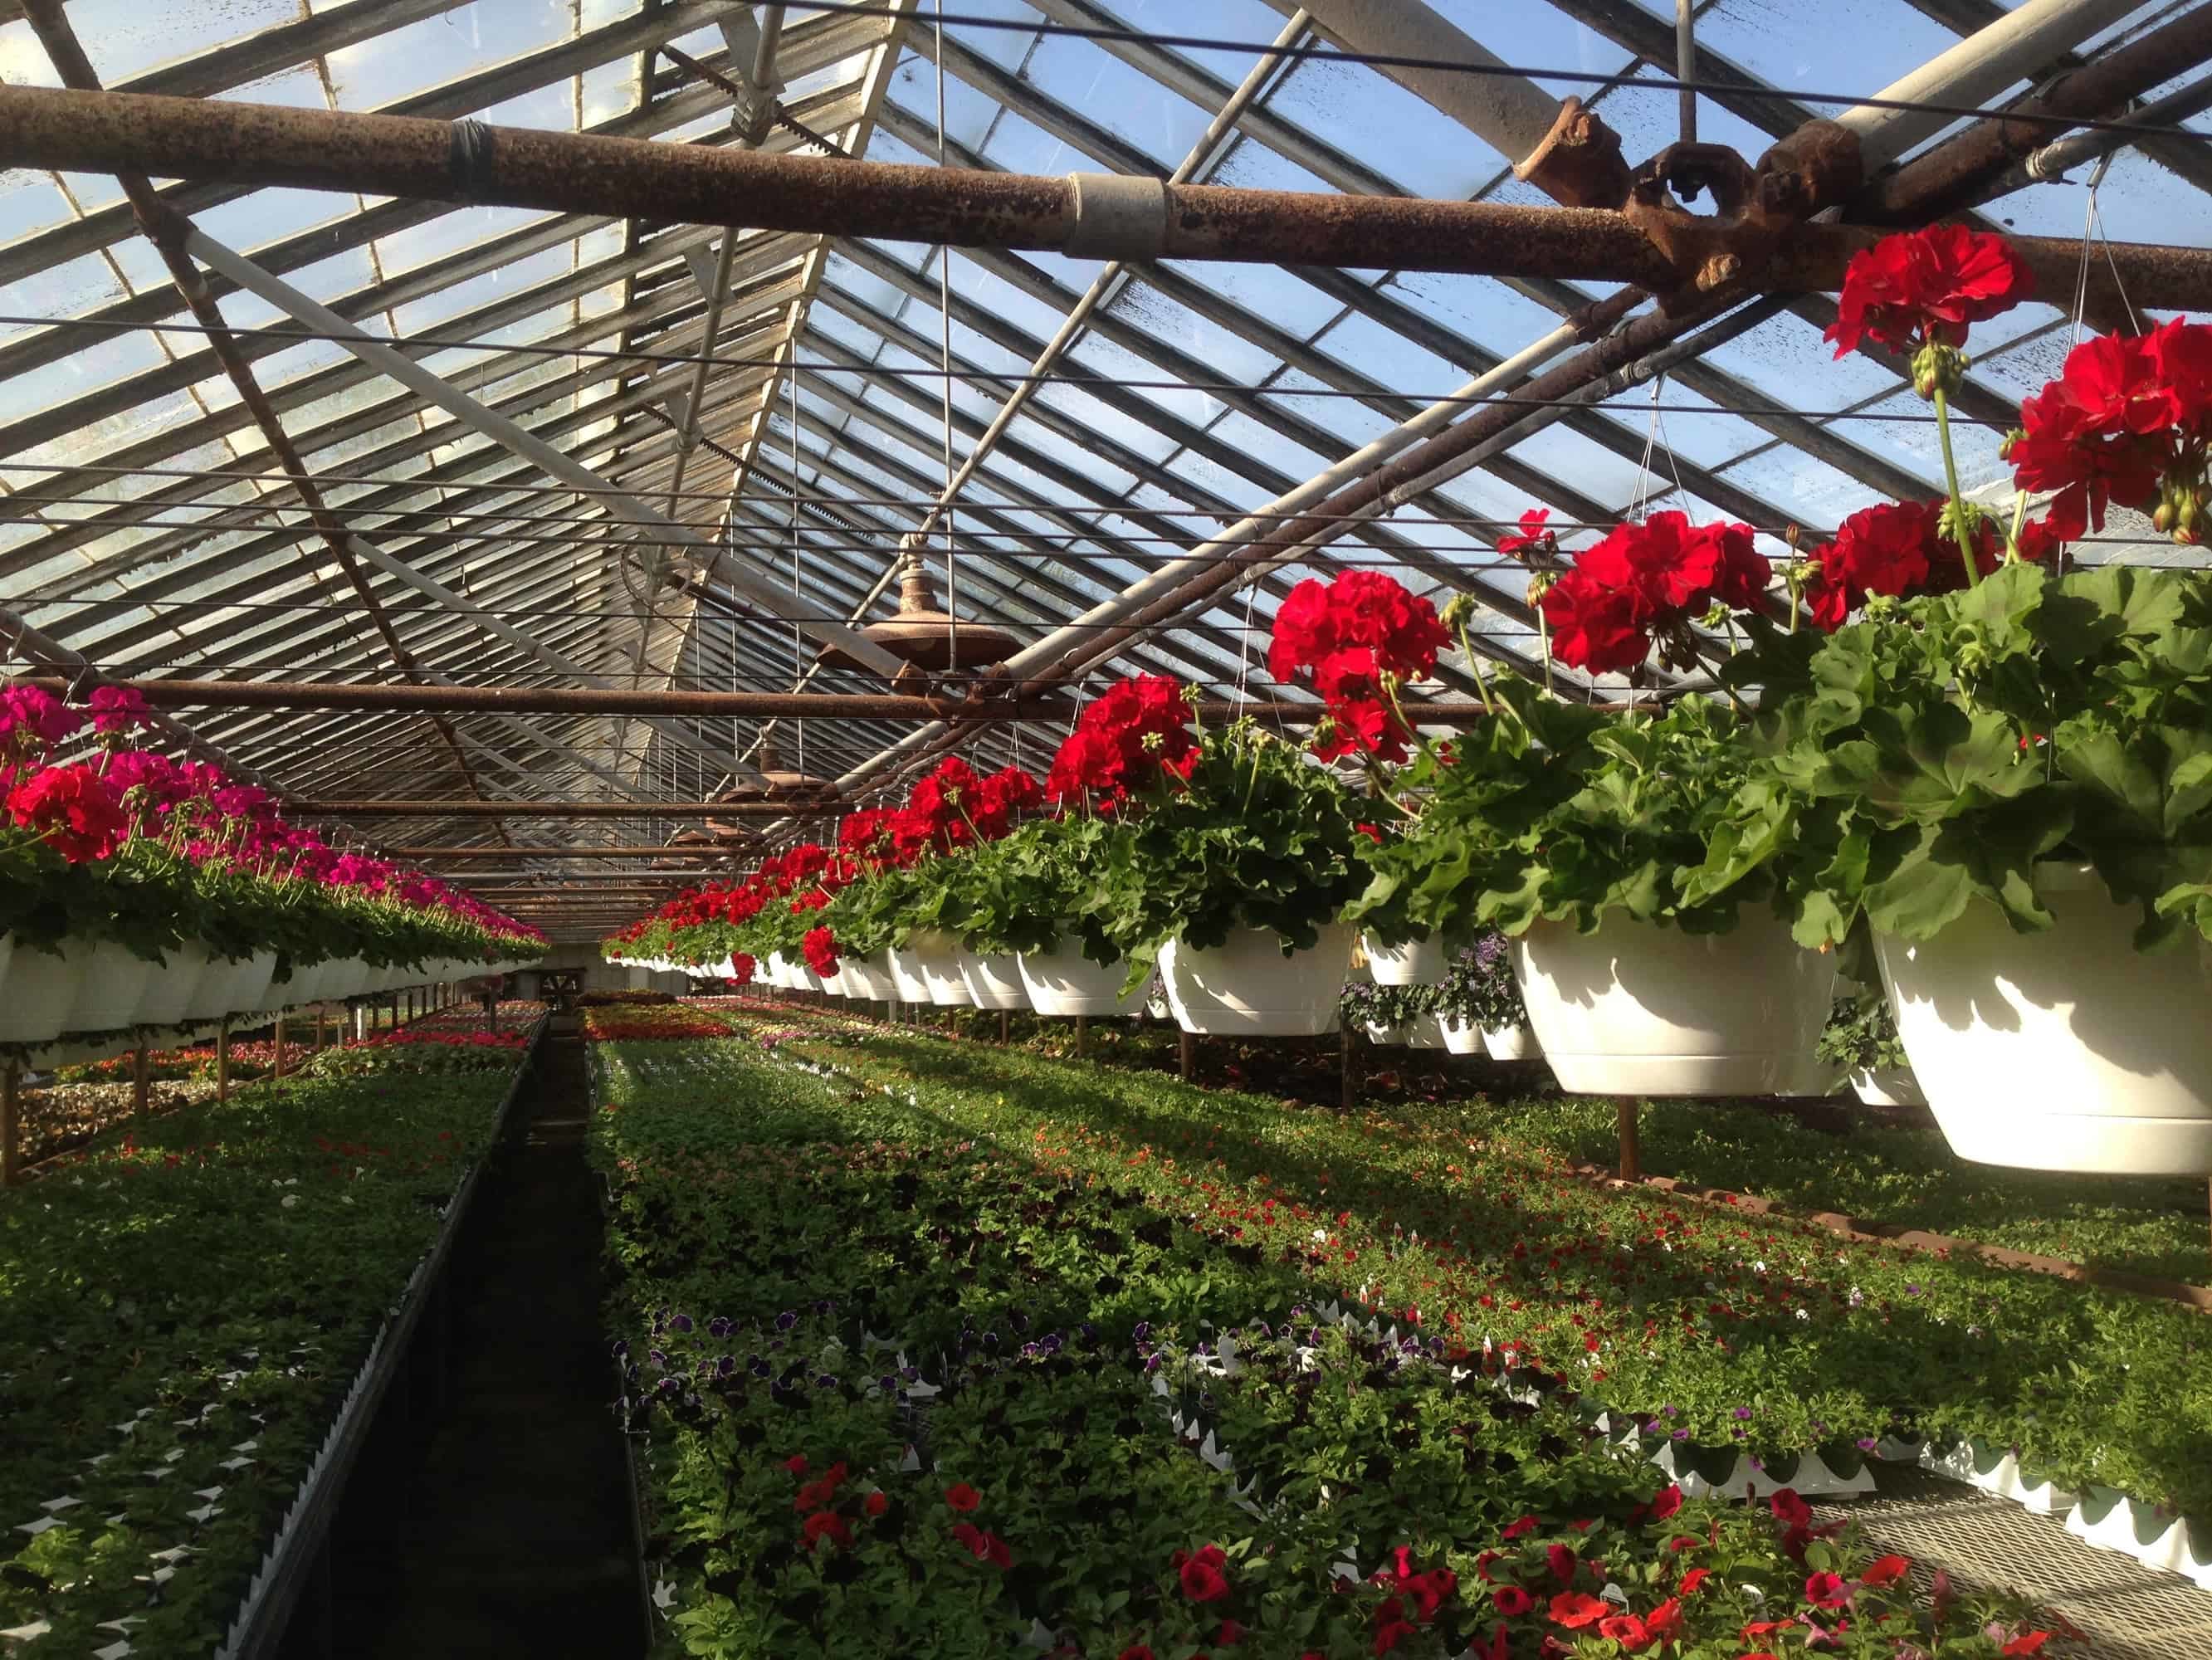 Greenhouse with annual flowers